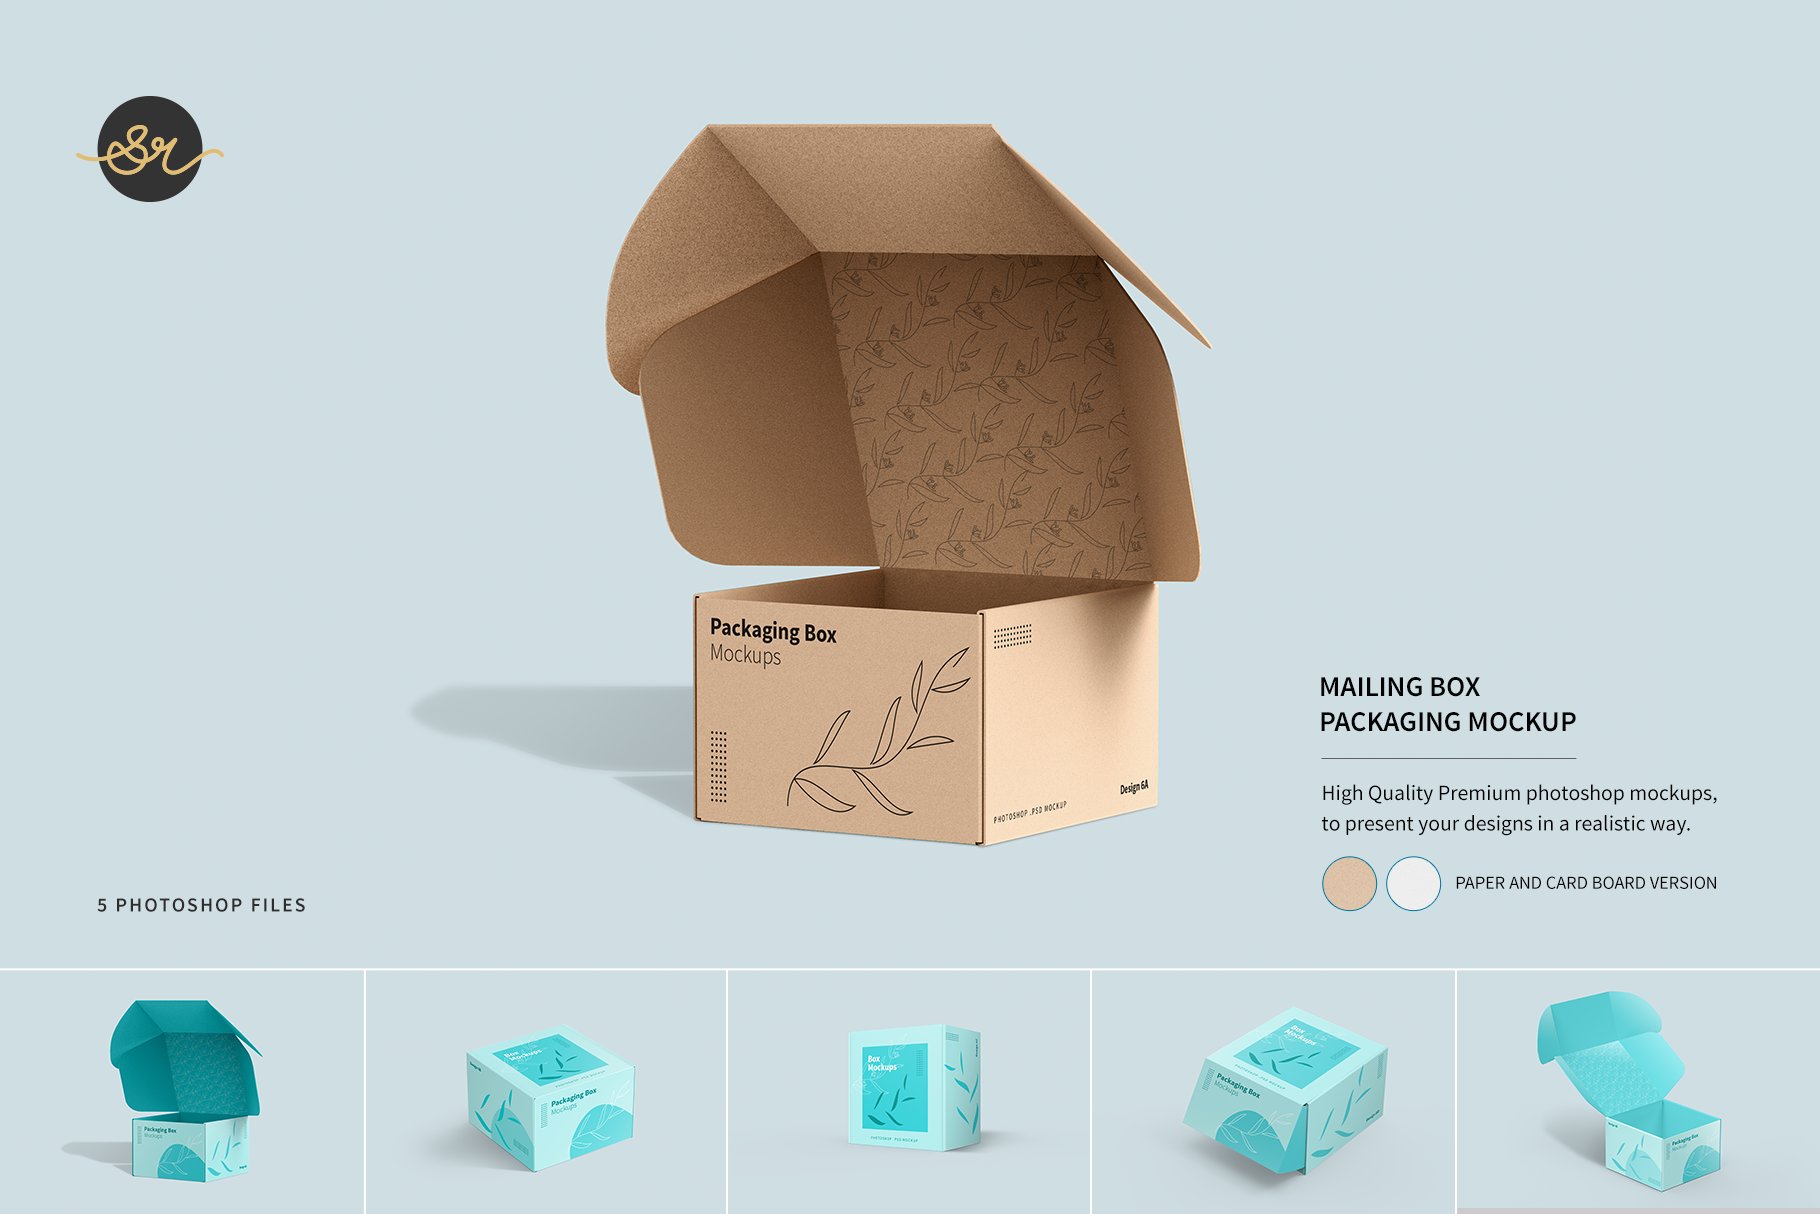 Mailing Box Packaging Mockups cover image.